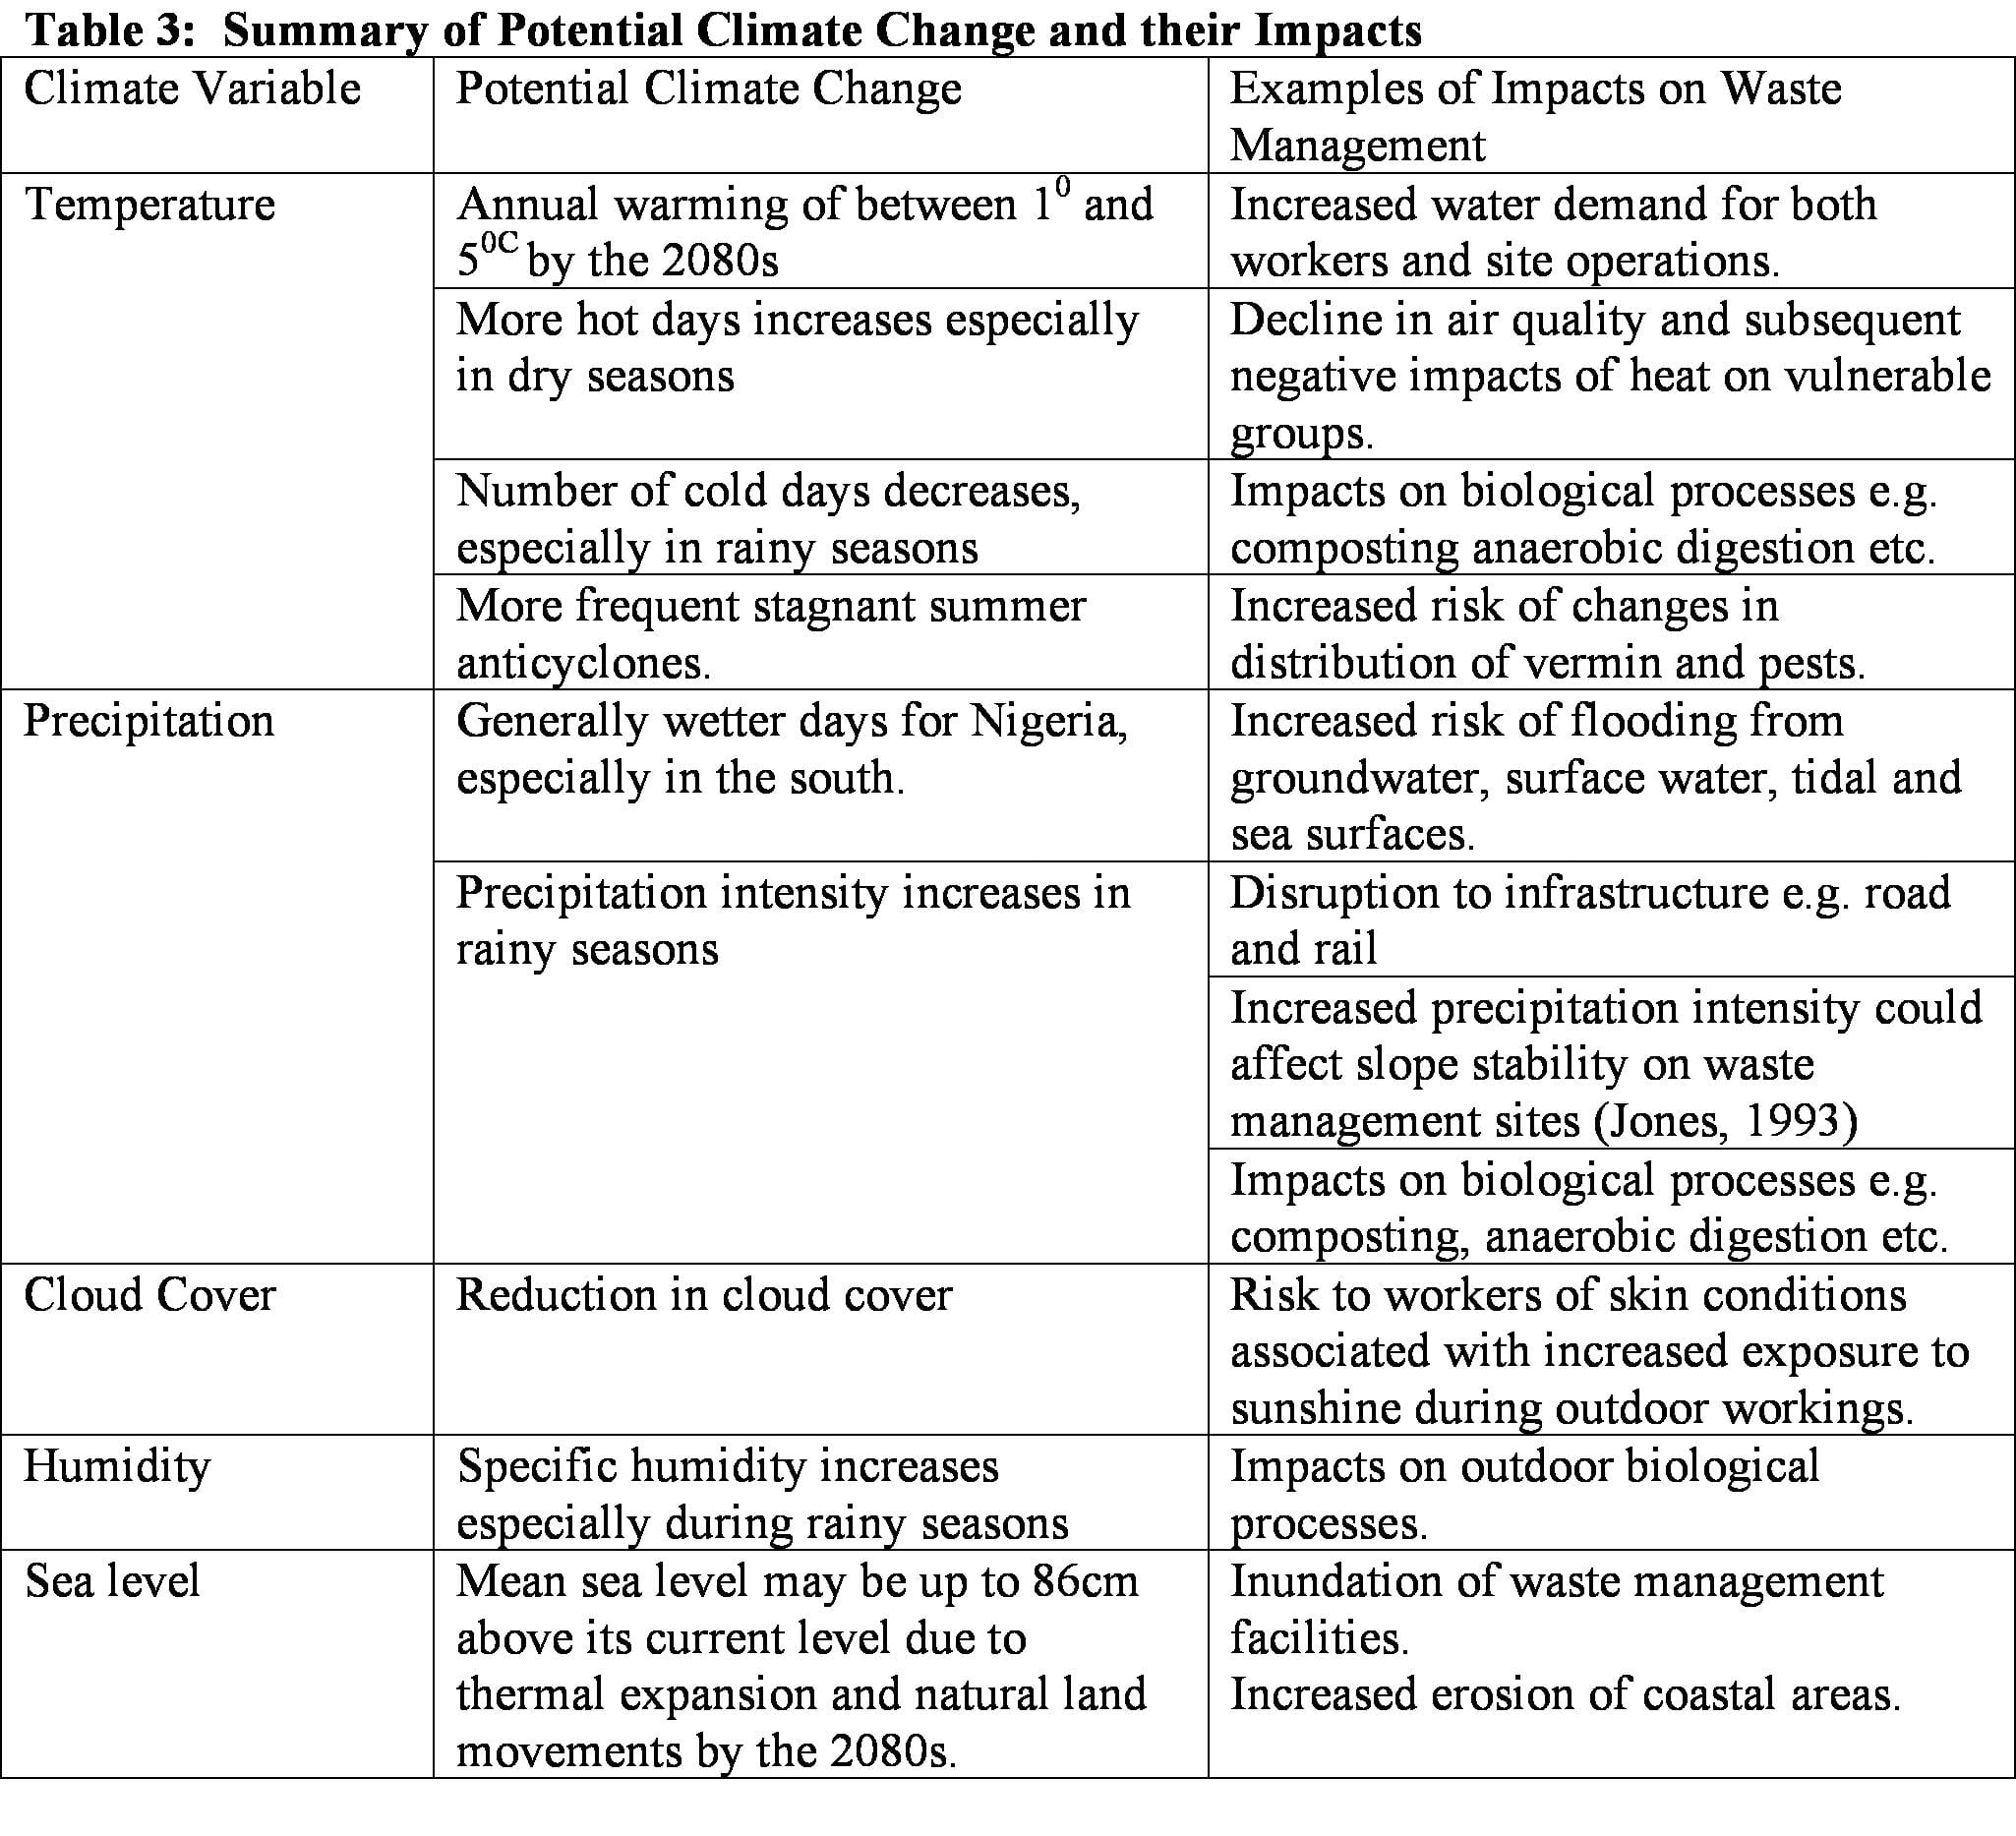 Table showing Summary of Potential Climate Change and their Impacts